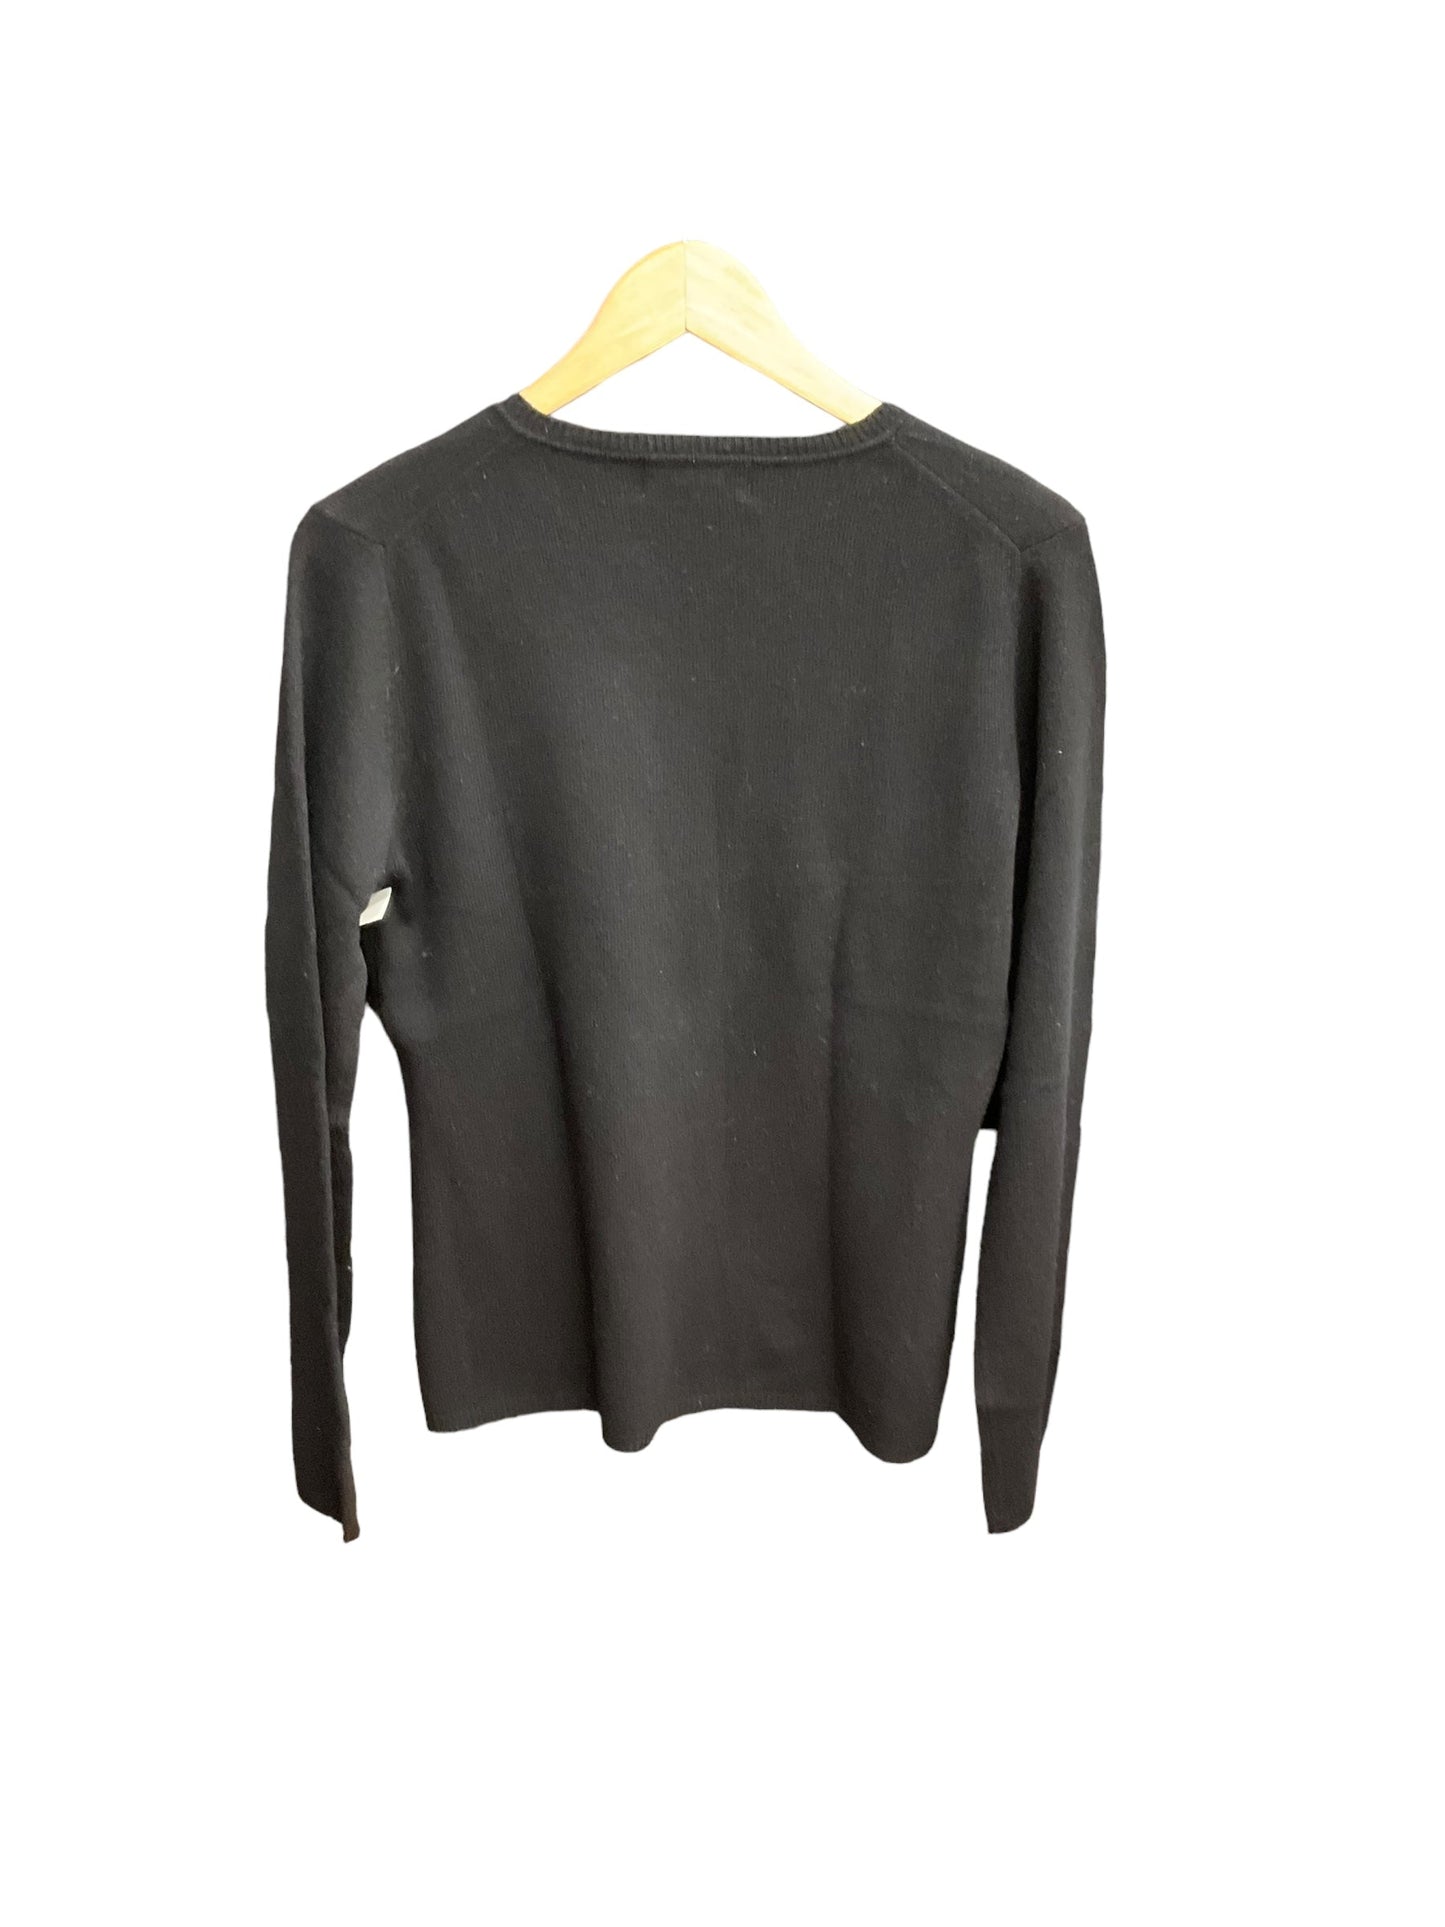 Black Sweater Cashmere Peck And Peck, Size L